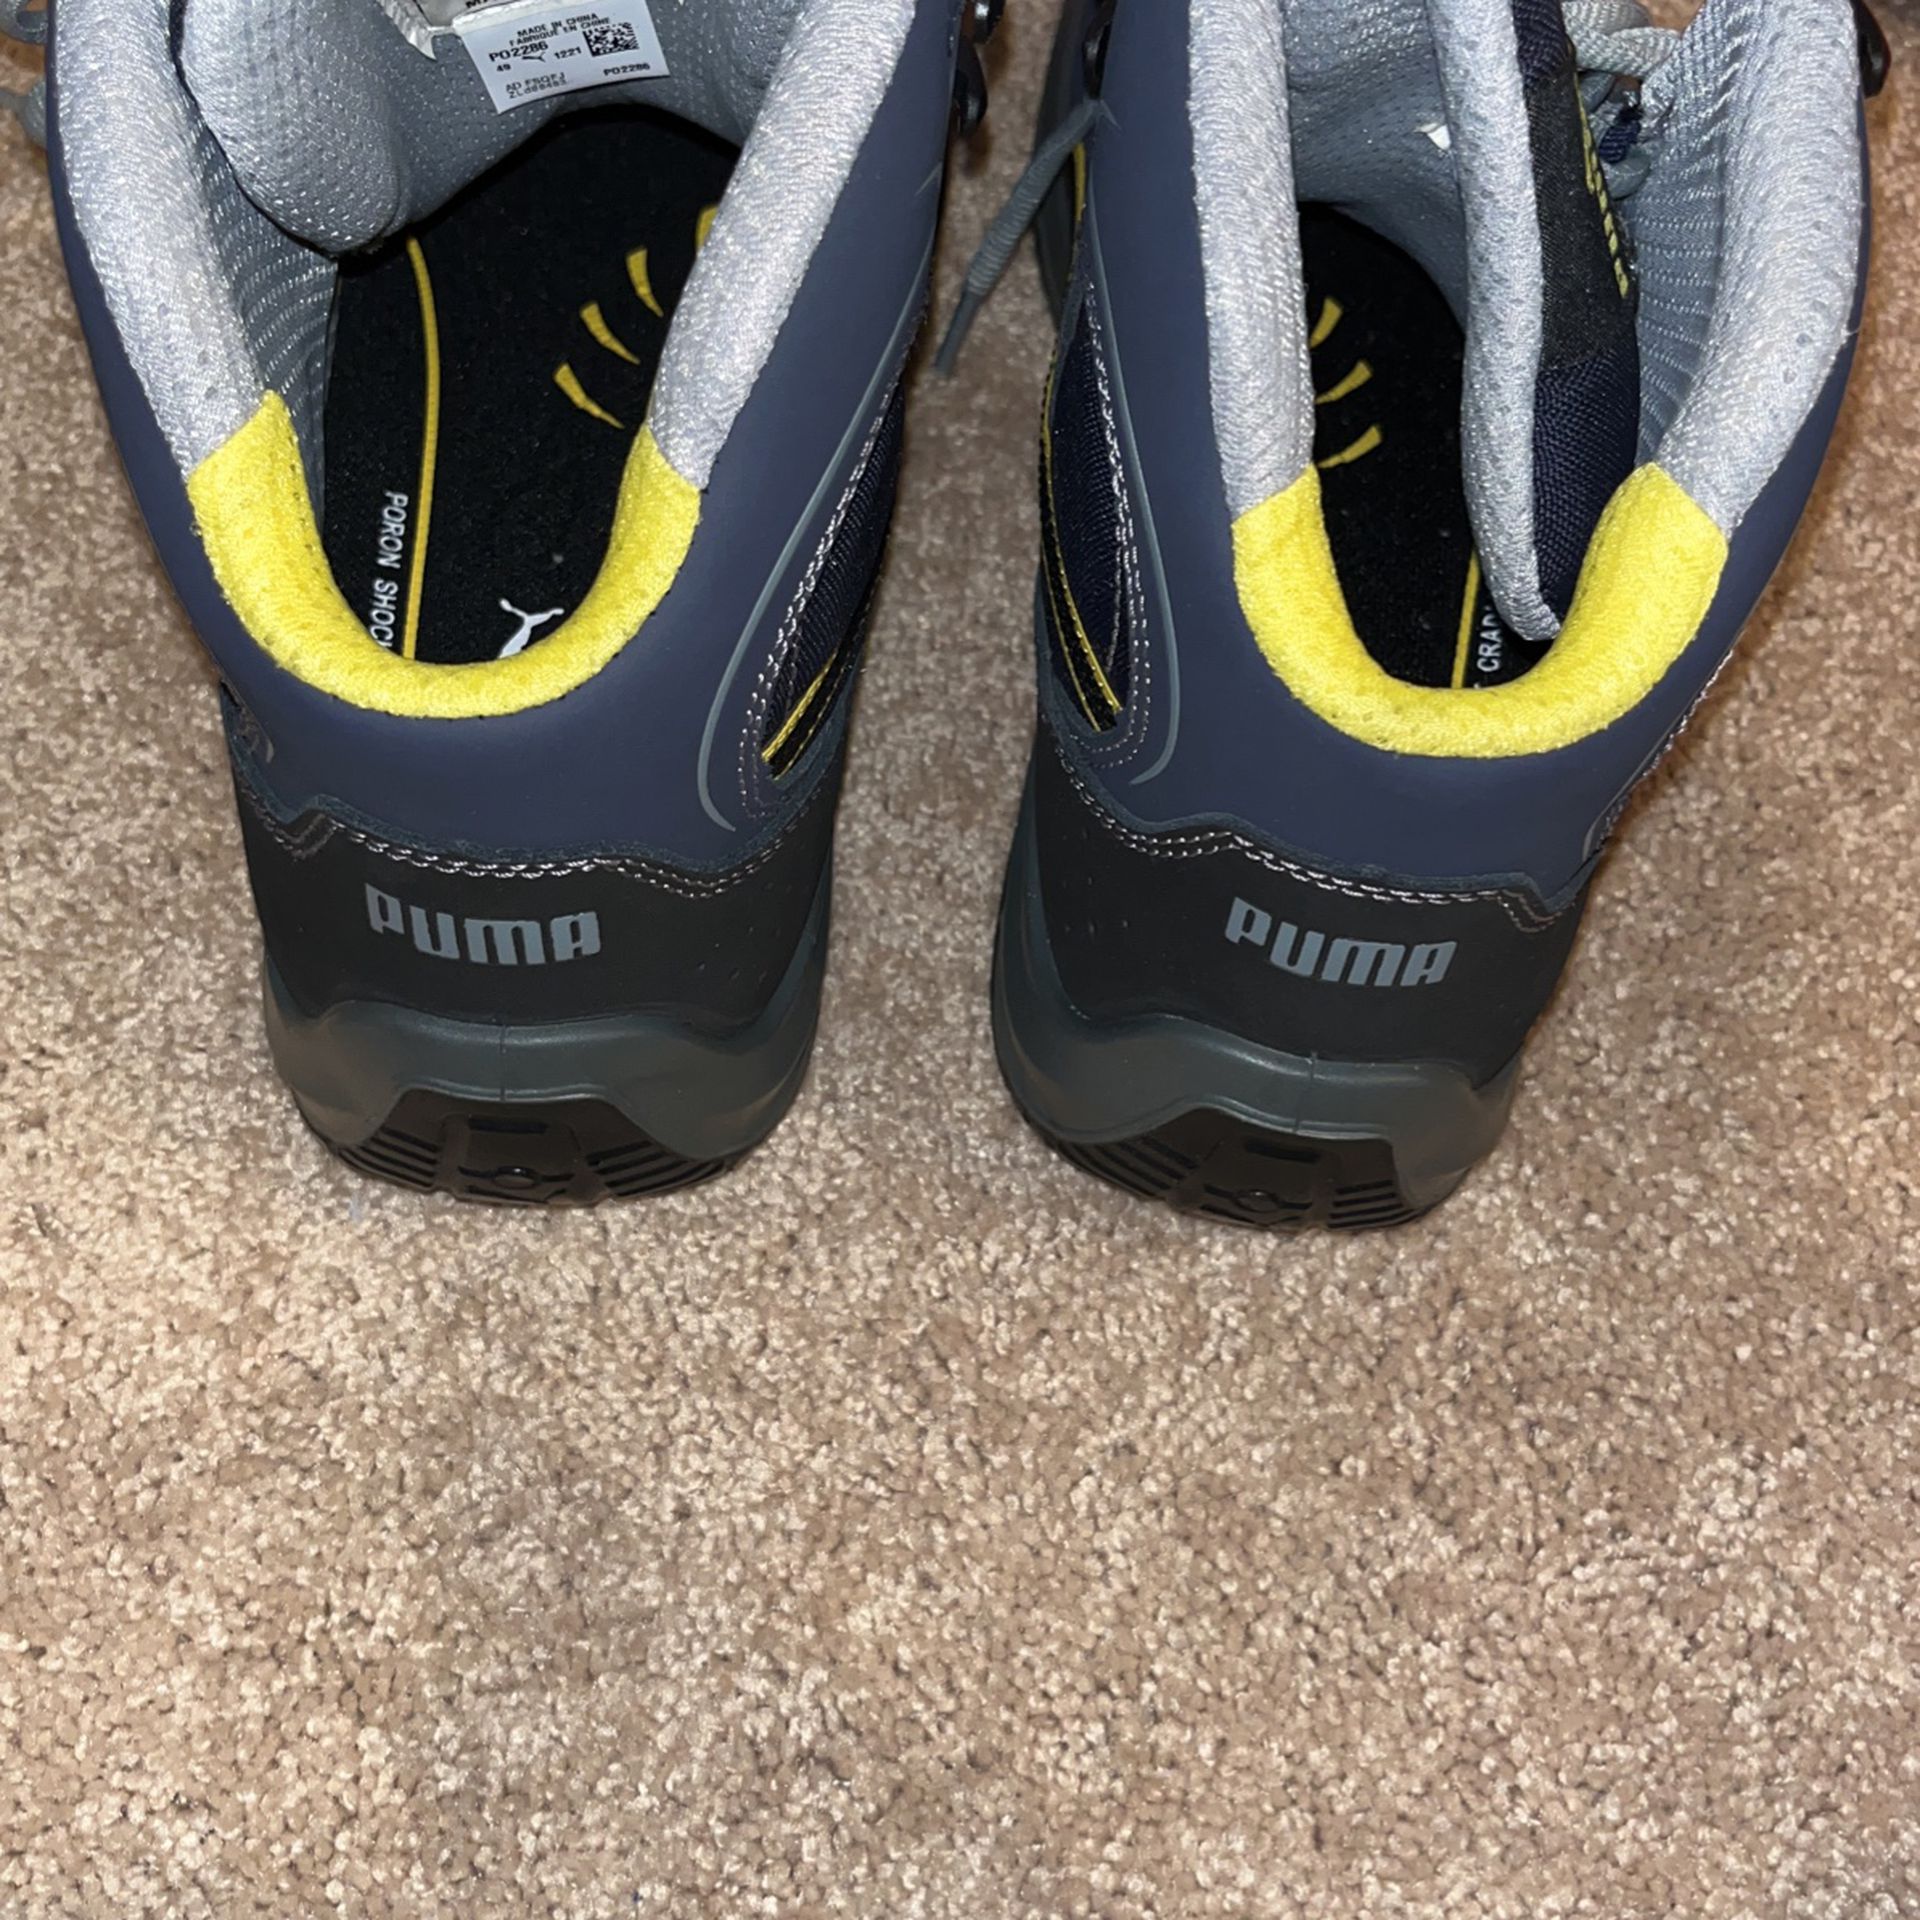 Puma Work Boots New for Sale in Charlotte, NC - OfferUp